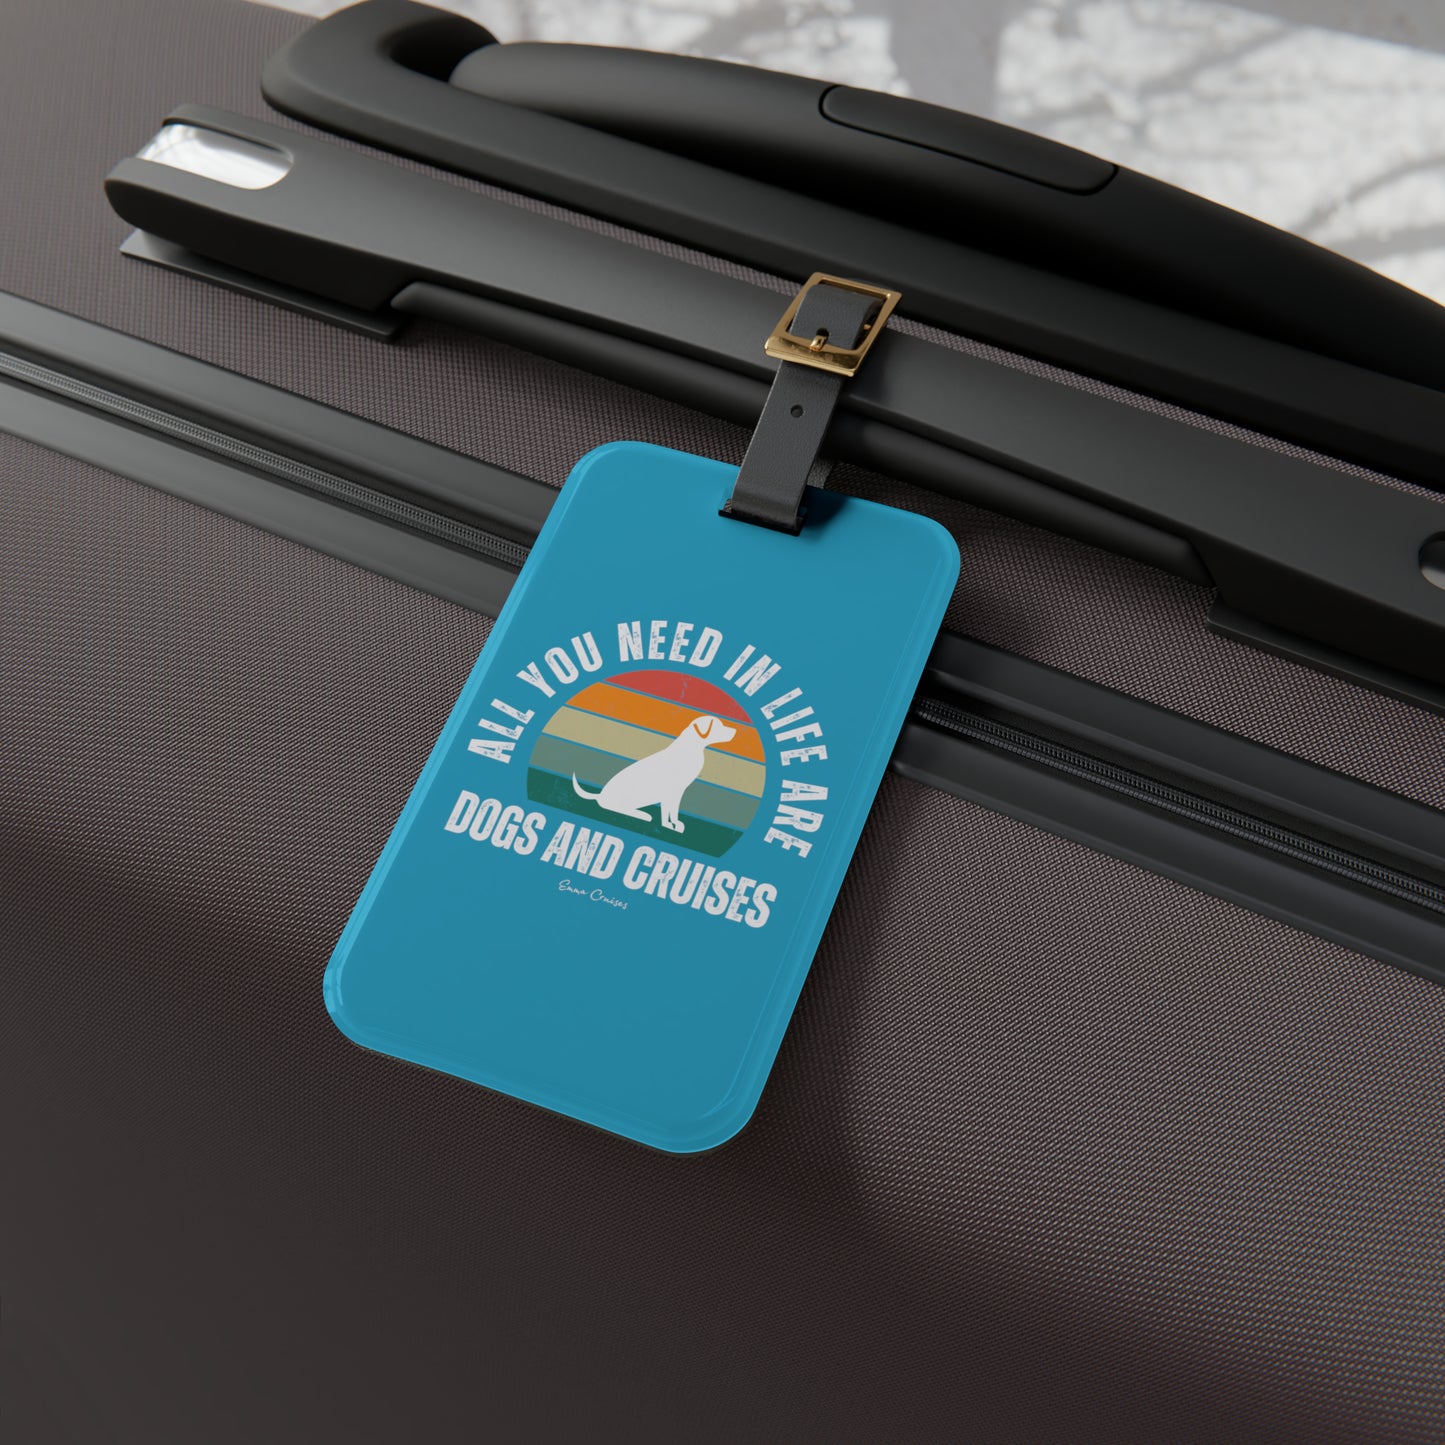 Dogs and Cruises - Luggage Tag